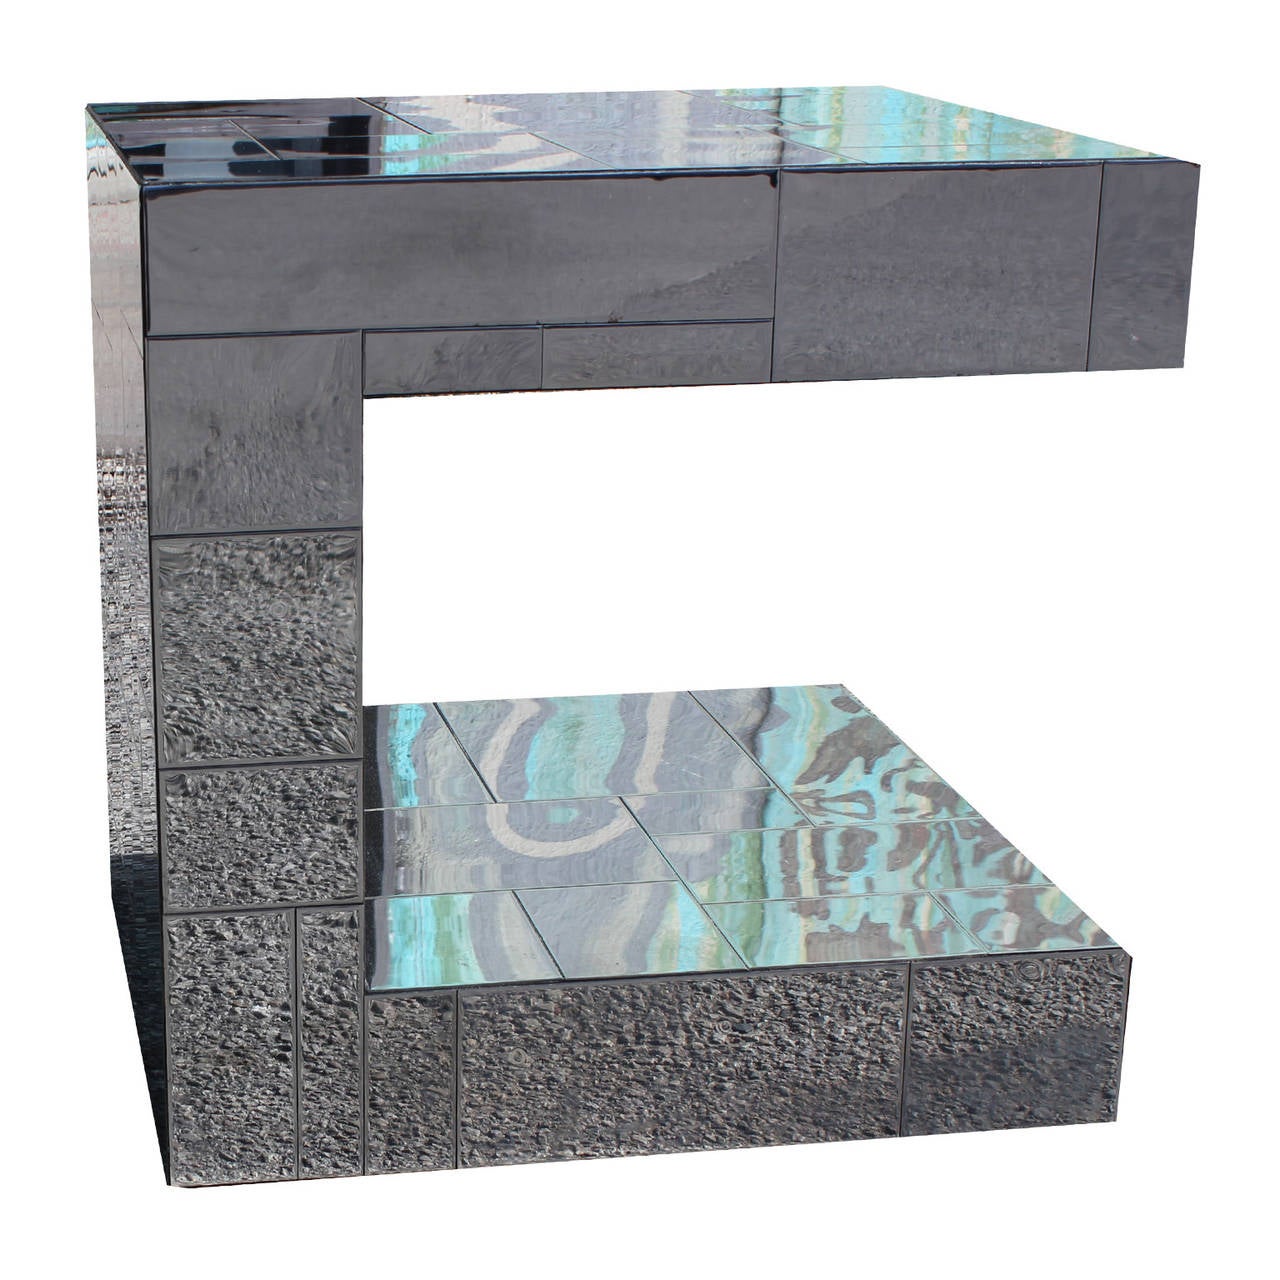 Gorgeous C shaped side table is by Paul Evans from his Cityscape collection for Directional. Chrome plated steel tiling gives a unique mirrored effect. Truly stunning piece of brutalist design.